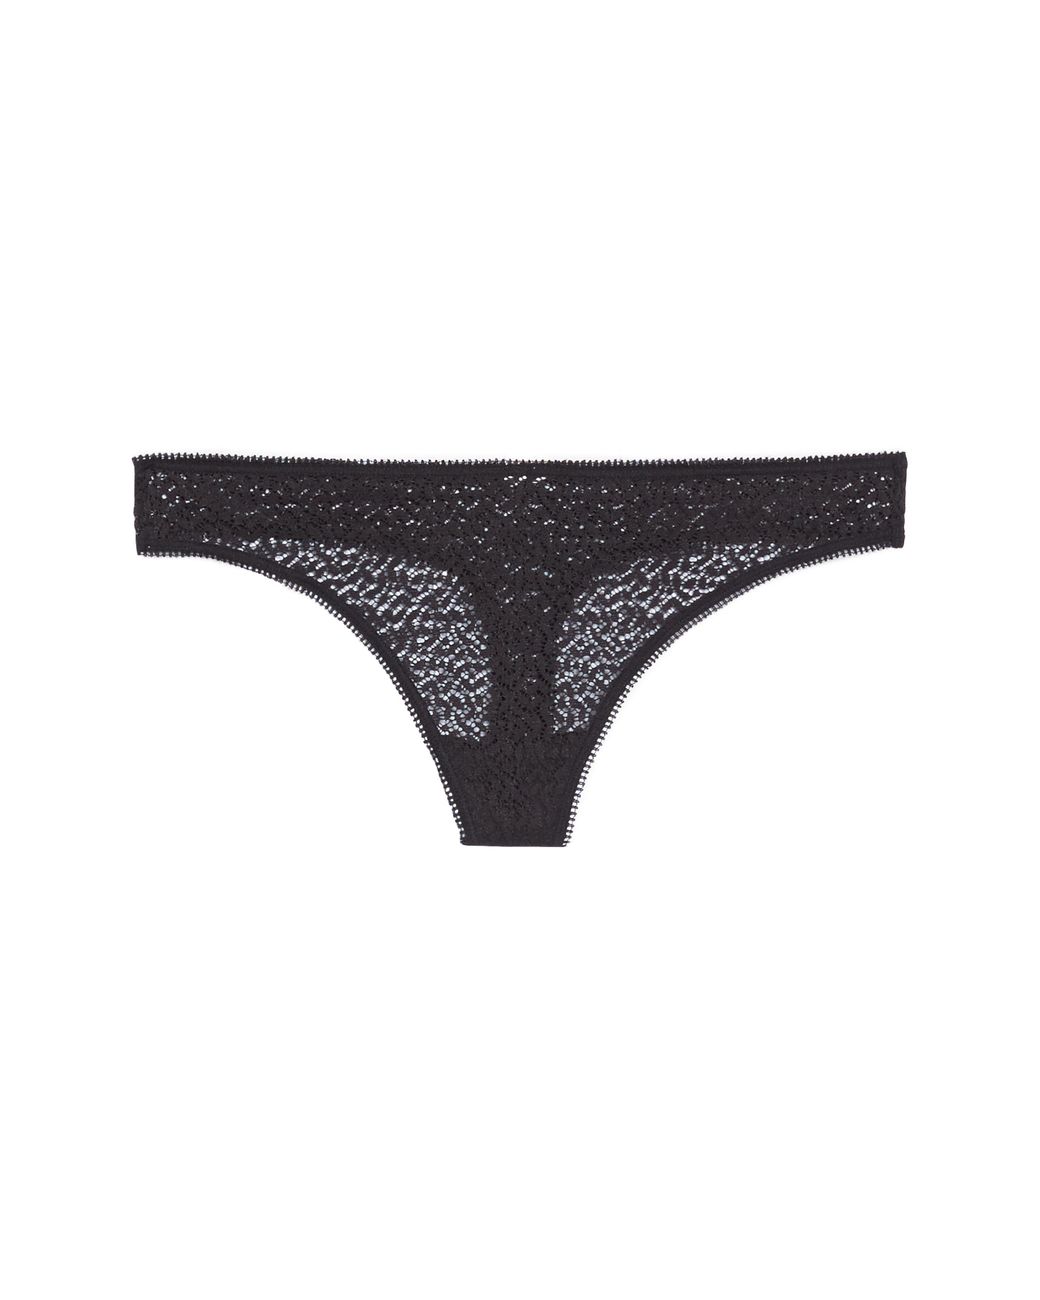 DKNY Modern Lace Thong in Black